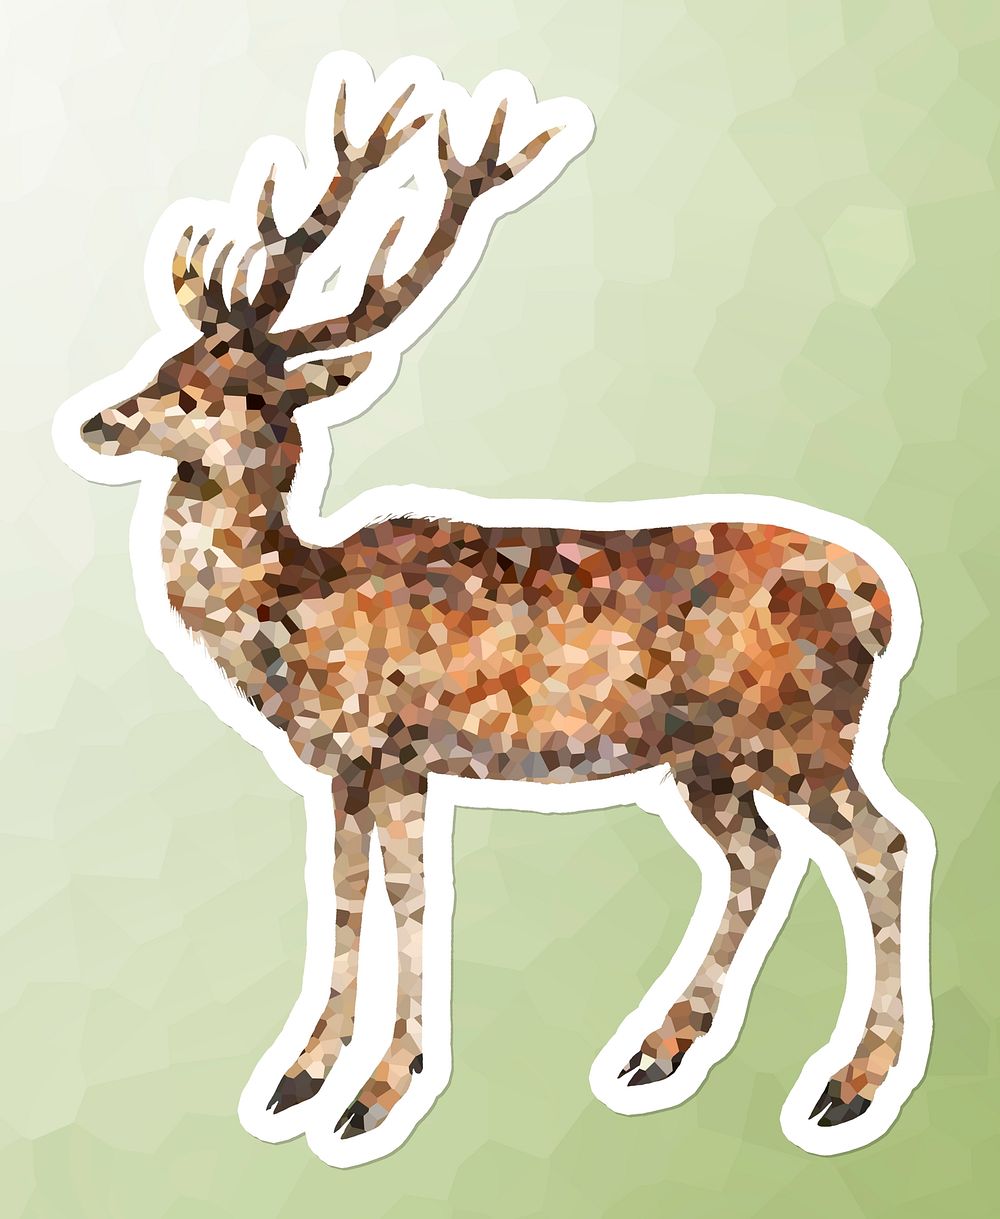 Crystallized style deer illustration with a white border sticker